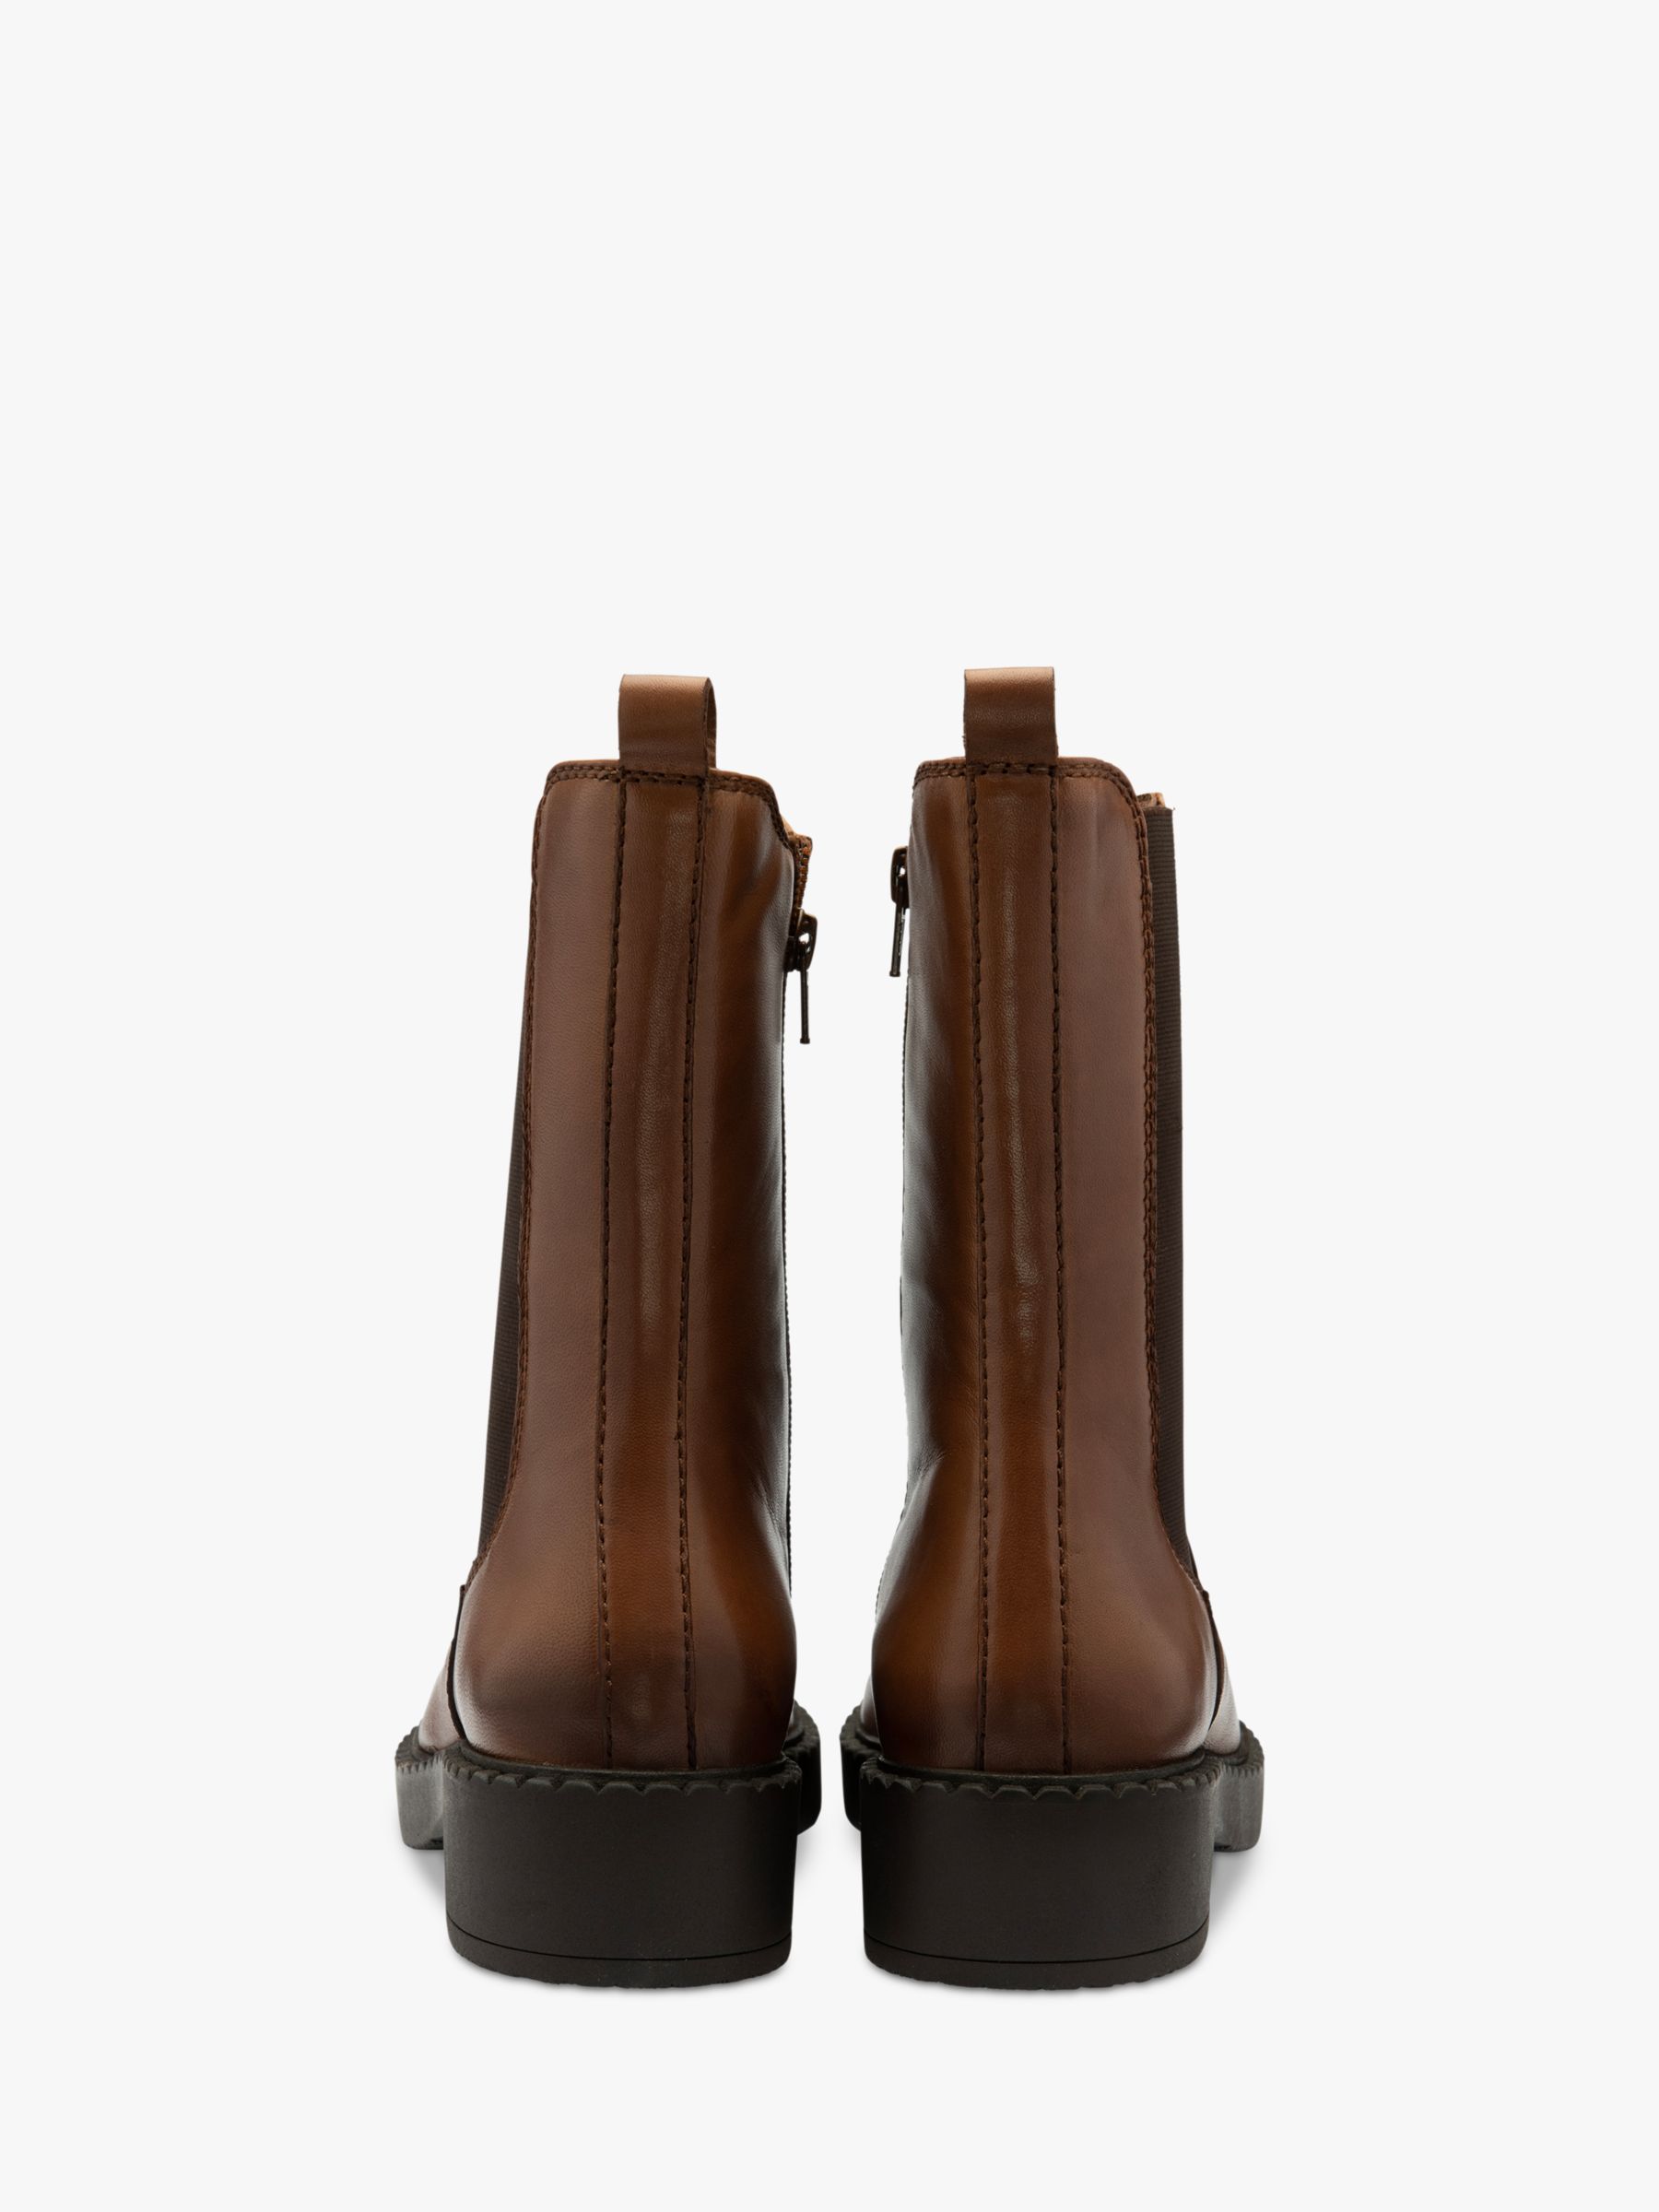 Ravel Garvie Leather Mid-Calf Boots, Tan at John Lewis & Partners